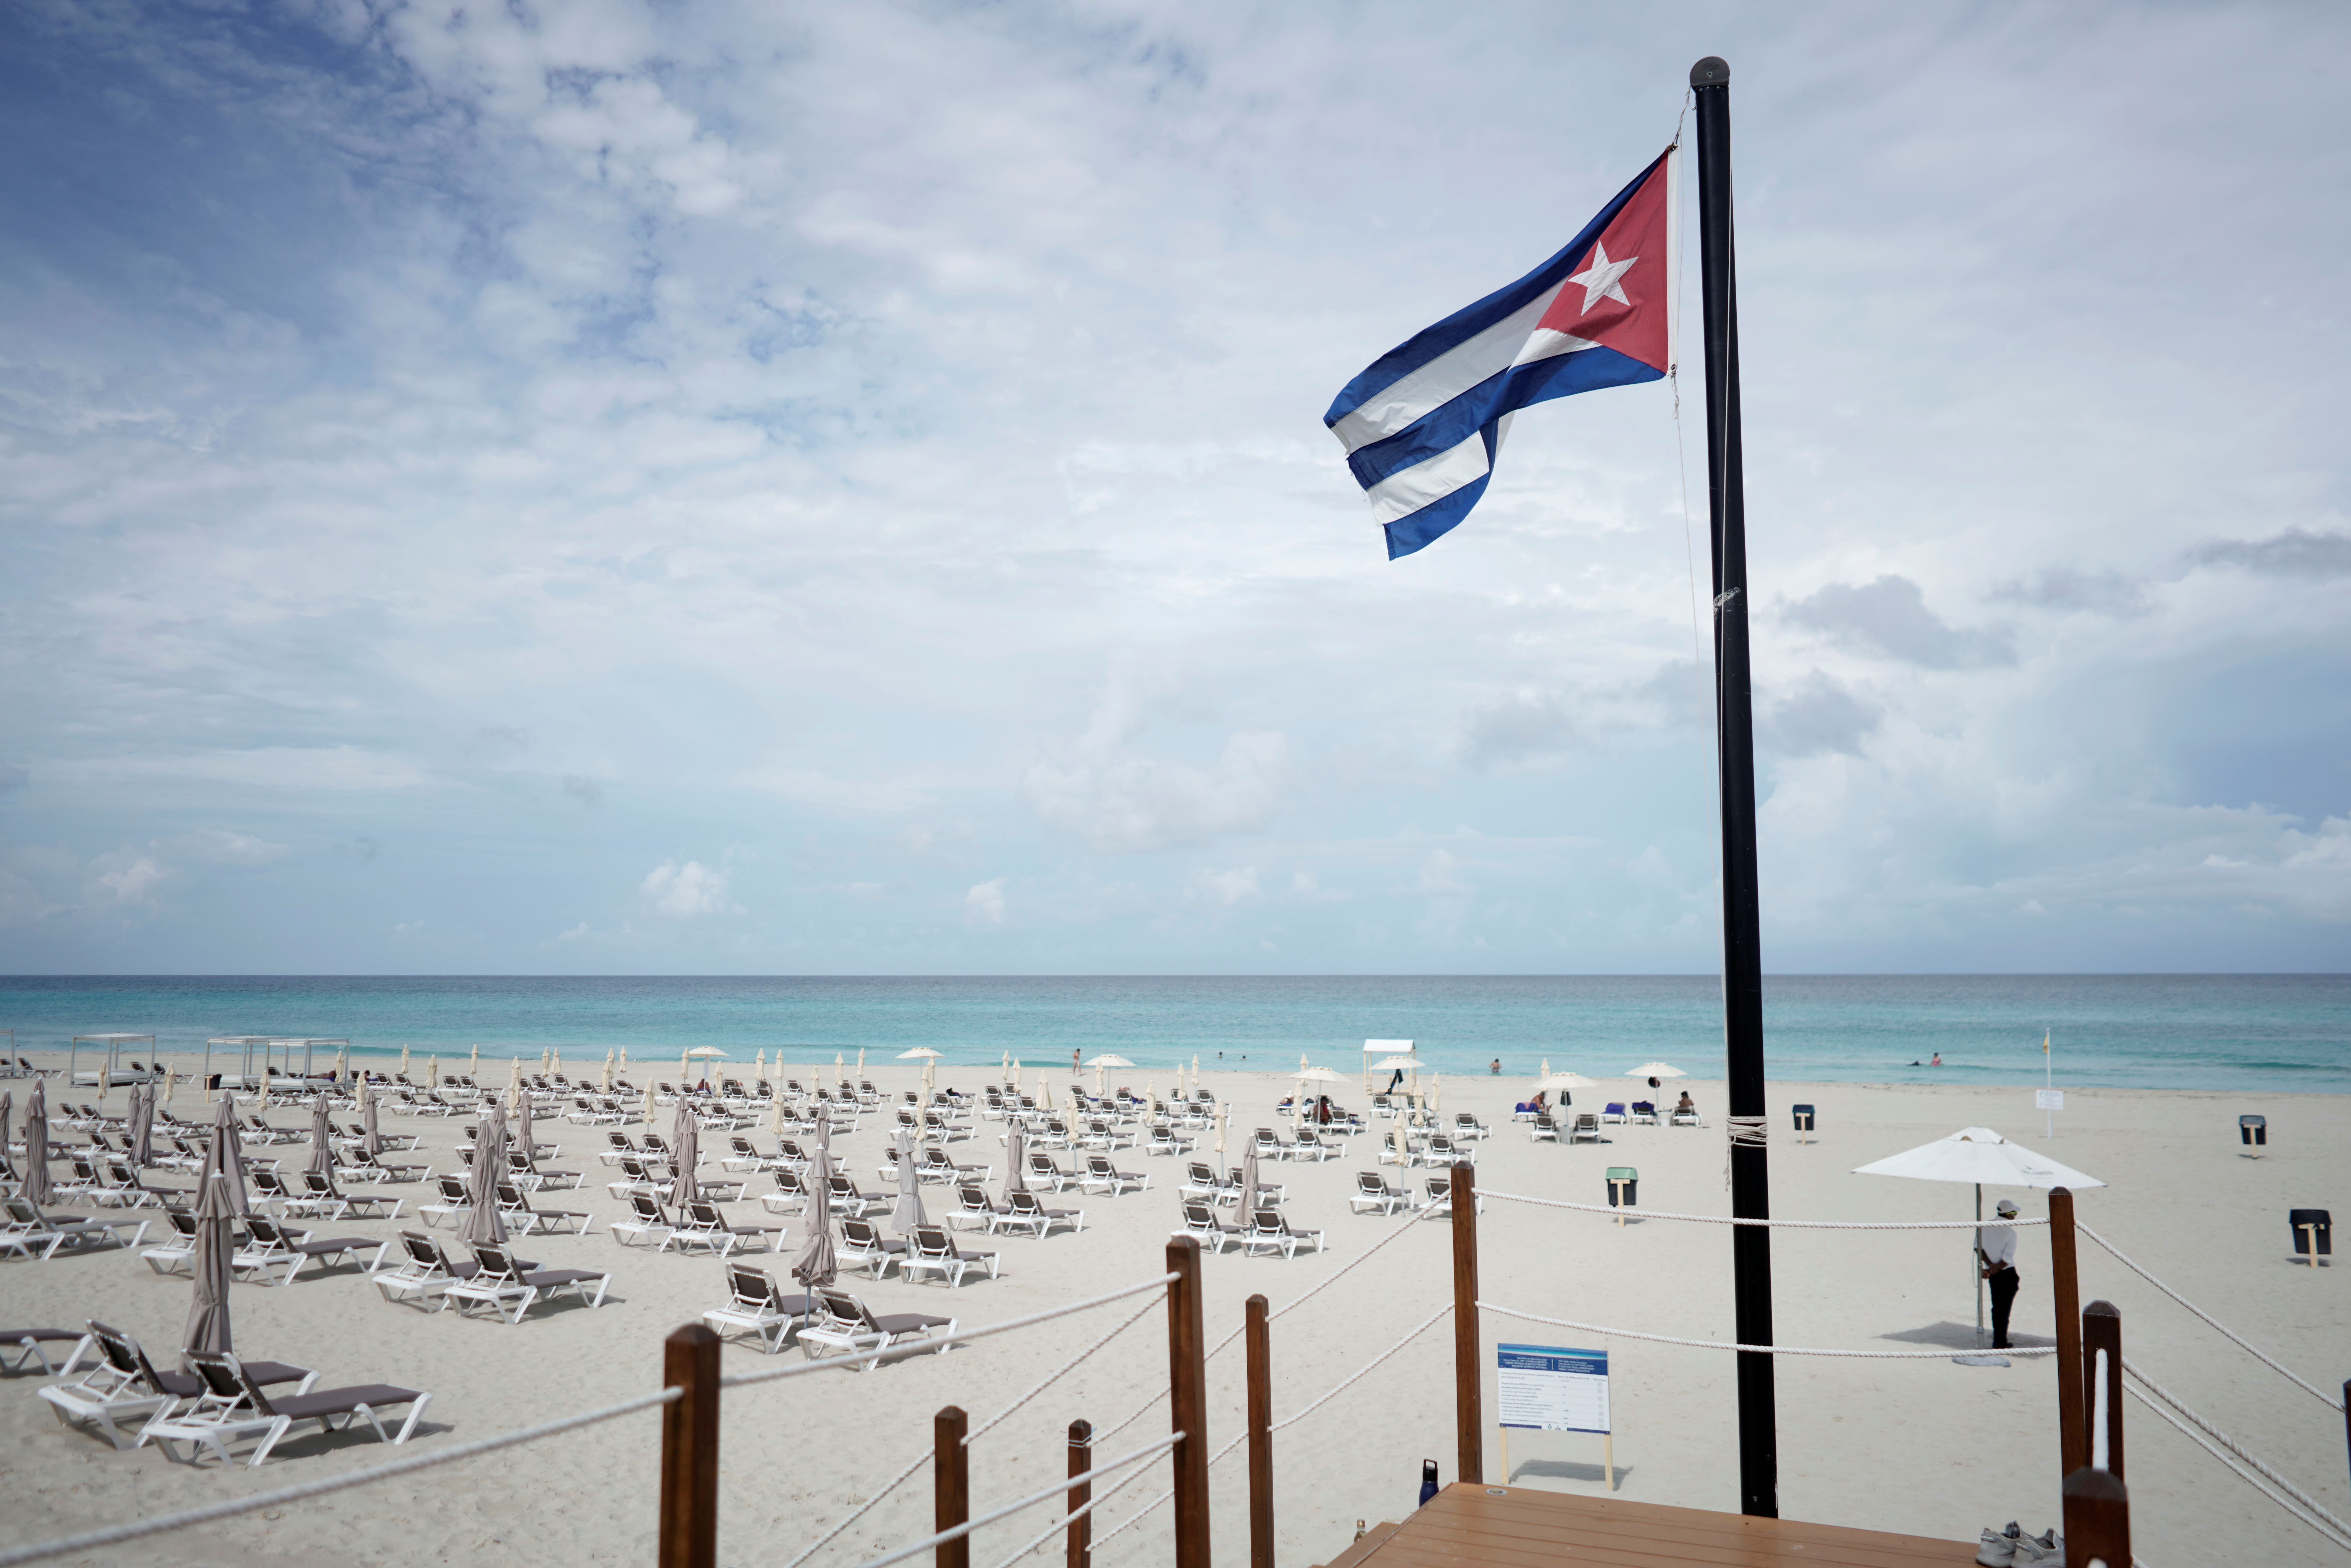 Cuban tourism sector focuses on its recovery from border opening